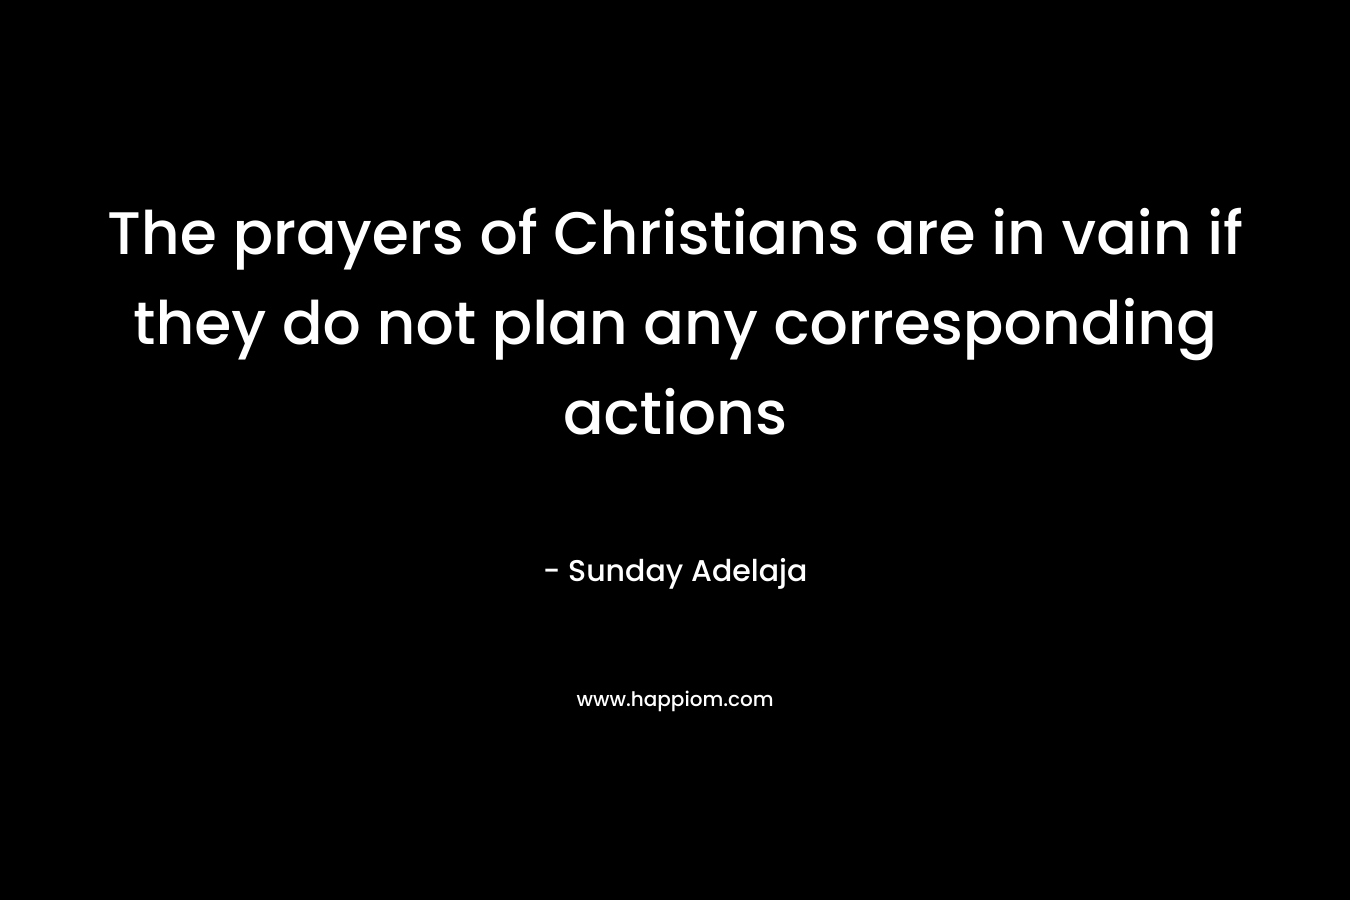 The prayers of Christians are in vain if they do not plan any corresponding actions